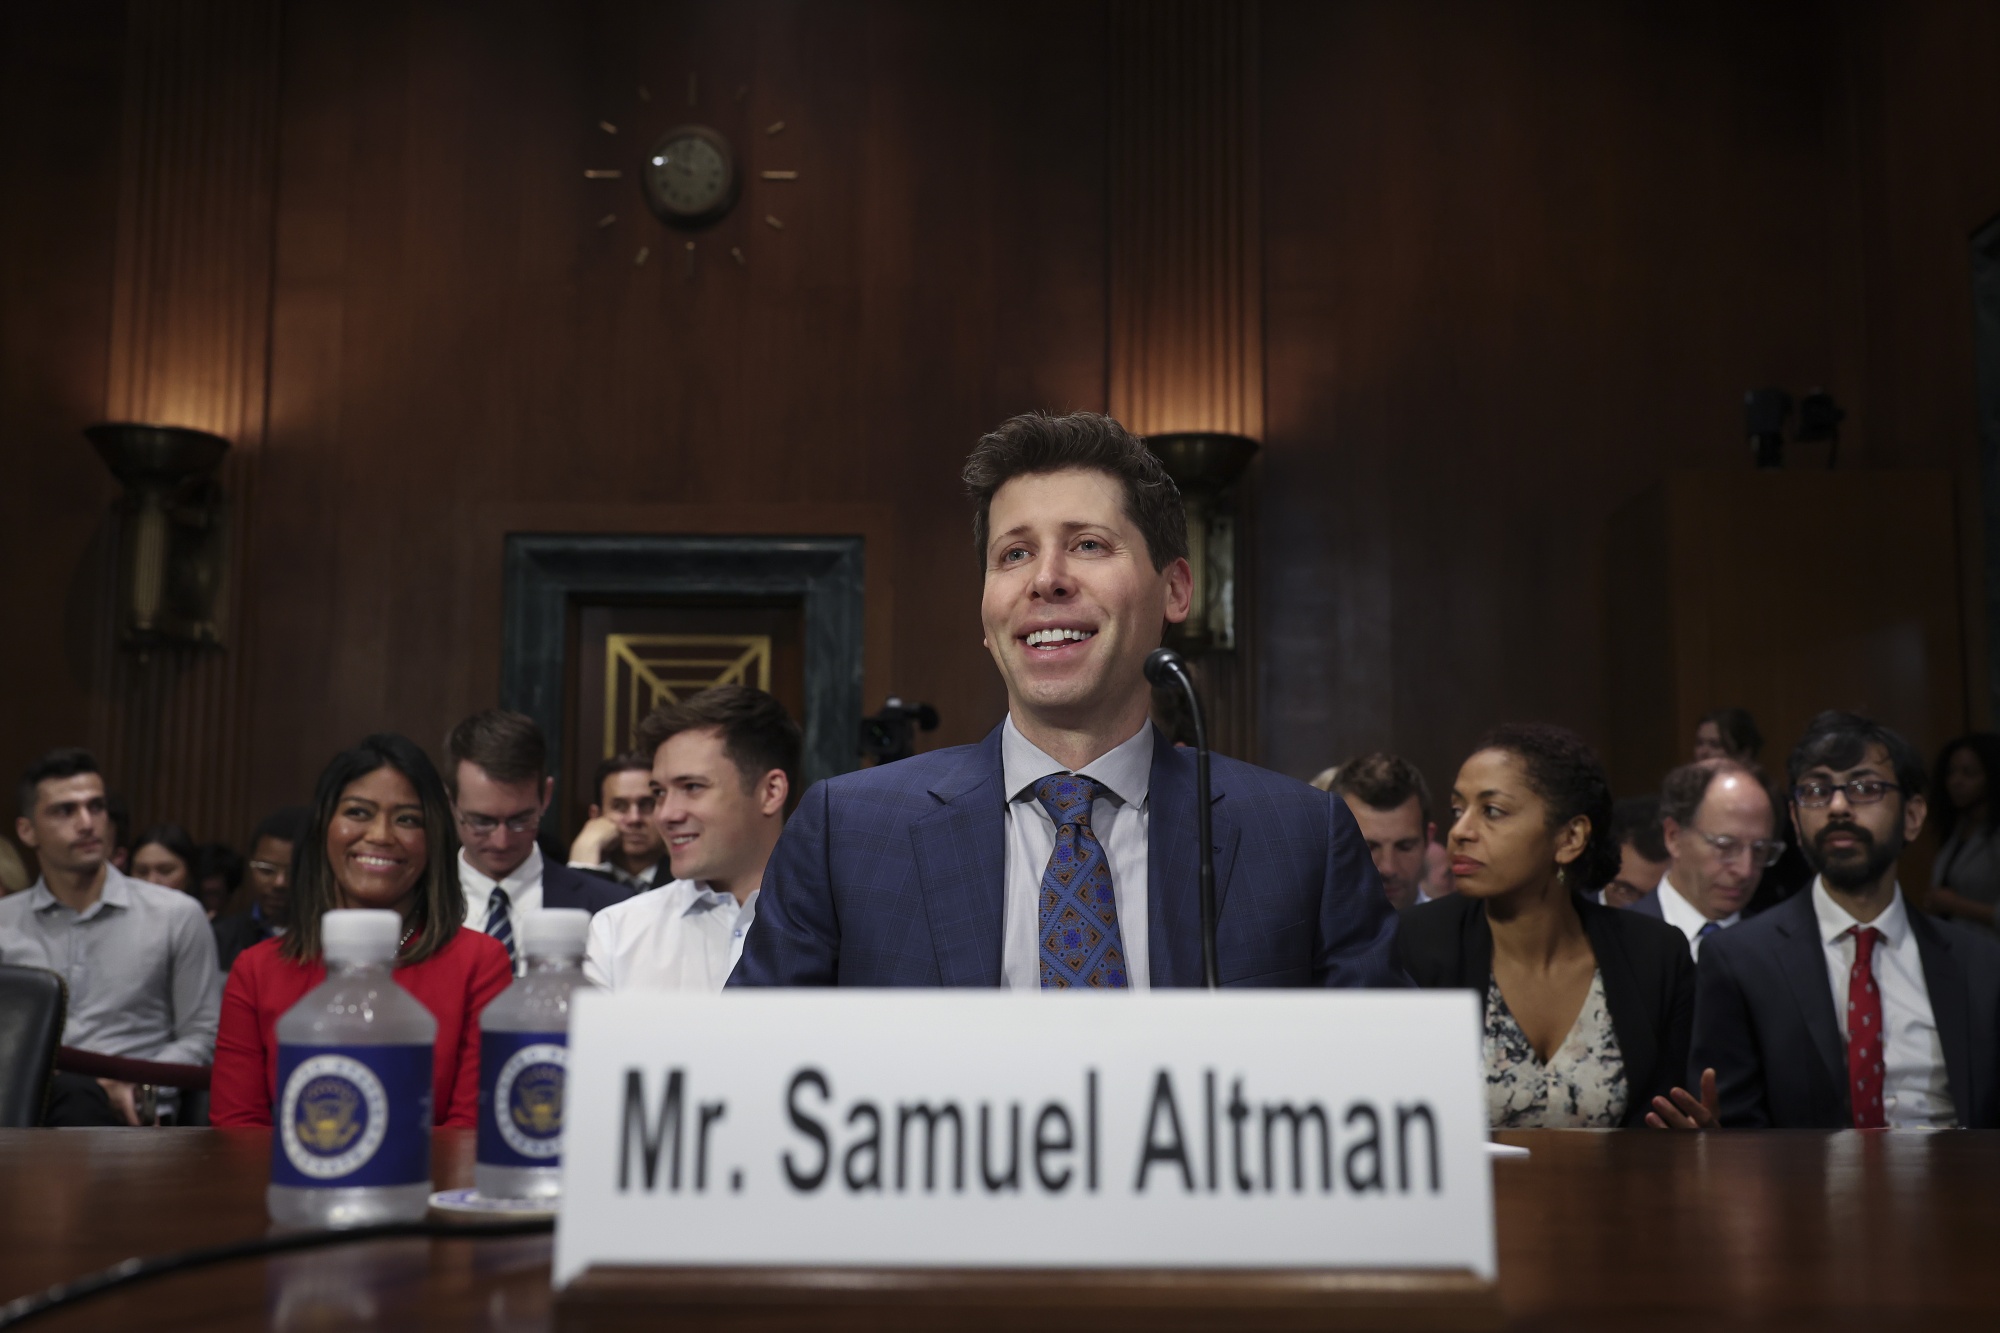 Samuel Altman, CEO of OpenAI, appears for testimony before the Senate Judiciary Subcommittee on Privacy, Technology, and the Law.